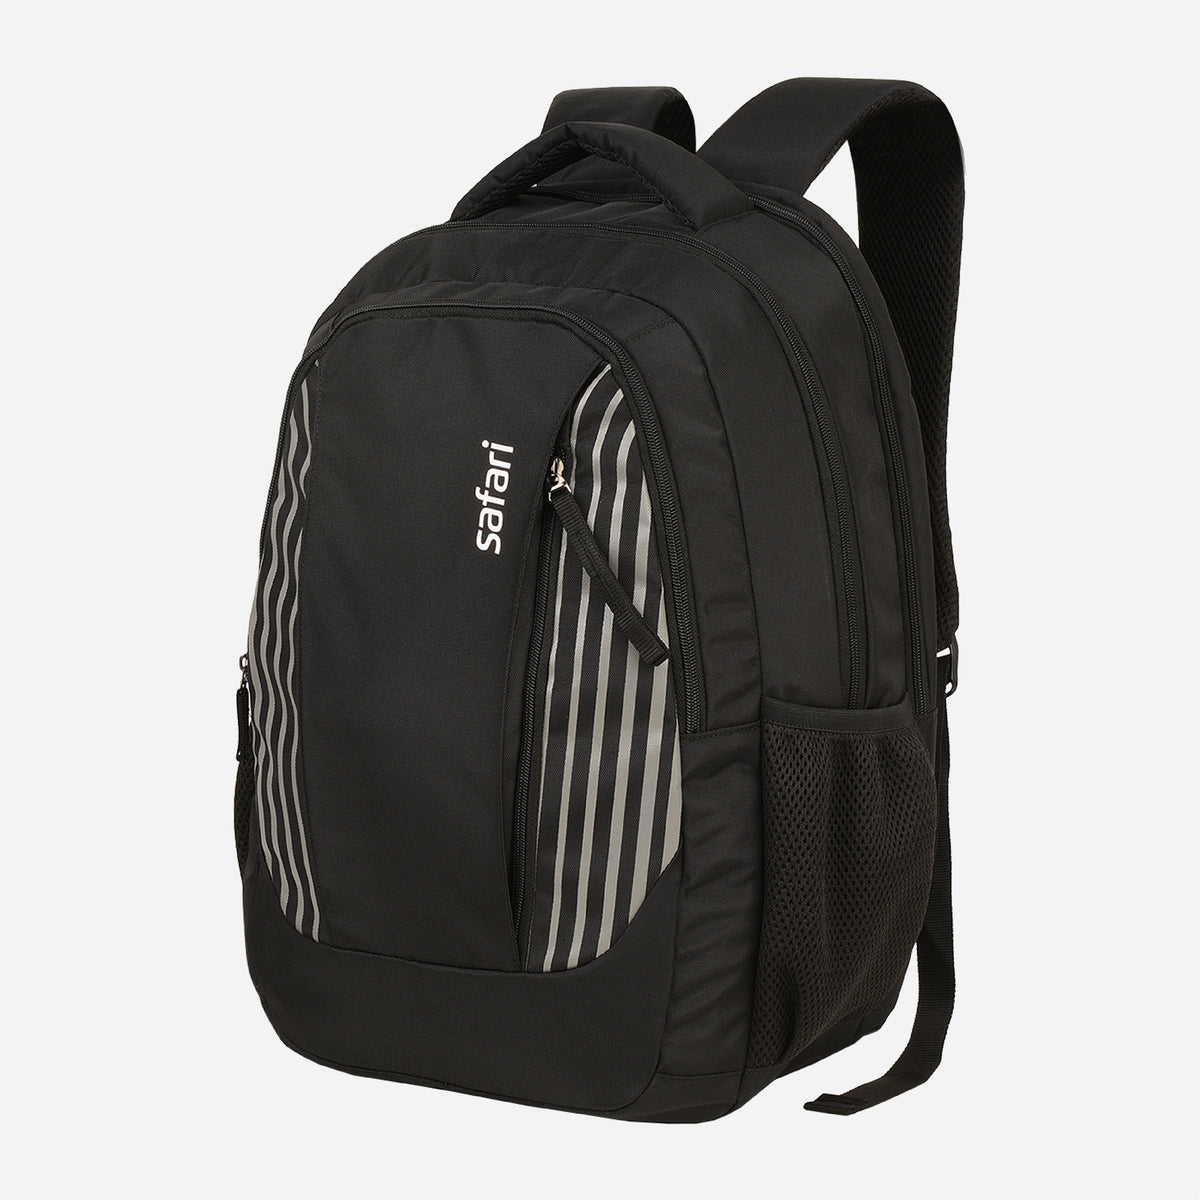 TechPack-T73 X-Pac Laptop Backpack 30L